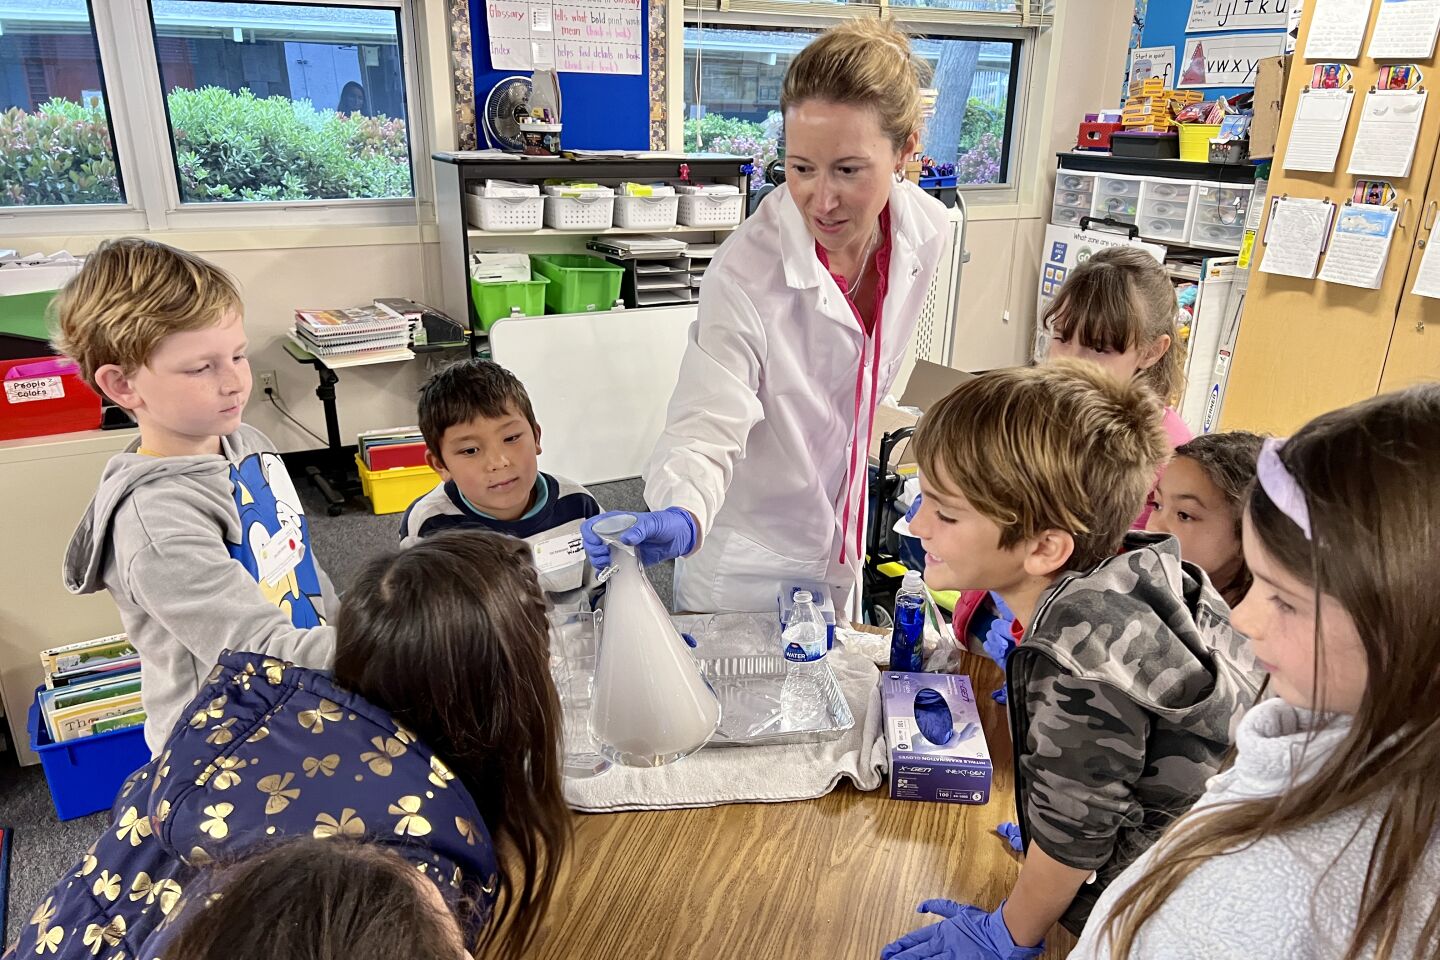 Torrey Pines Elementary School’s Science Discovery Day shares parents